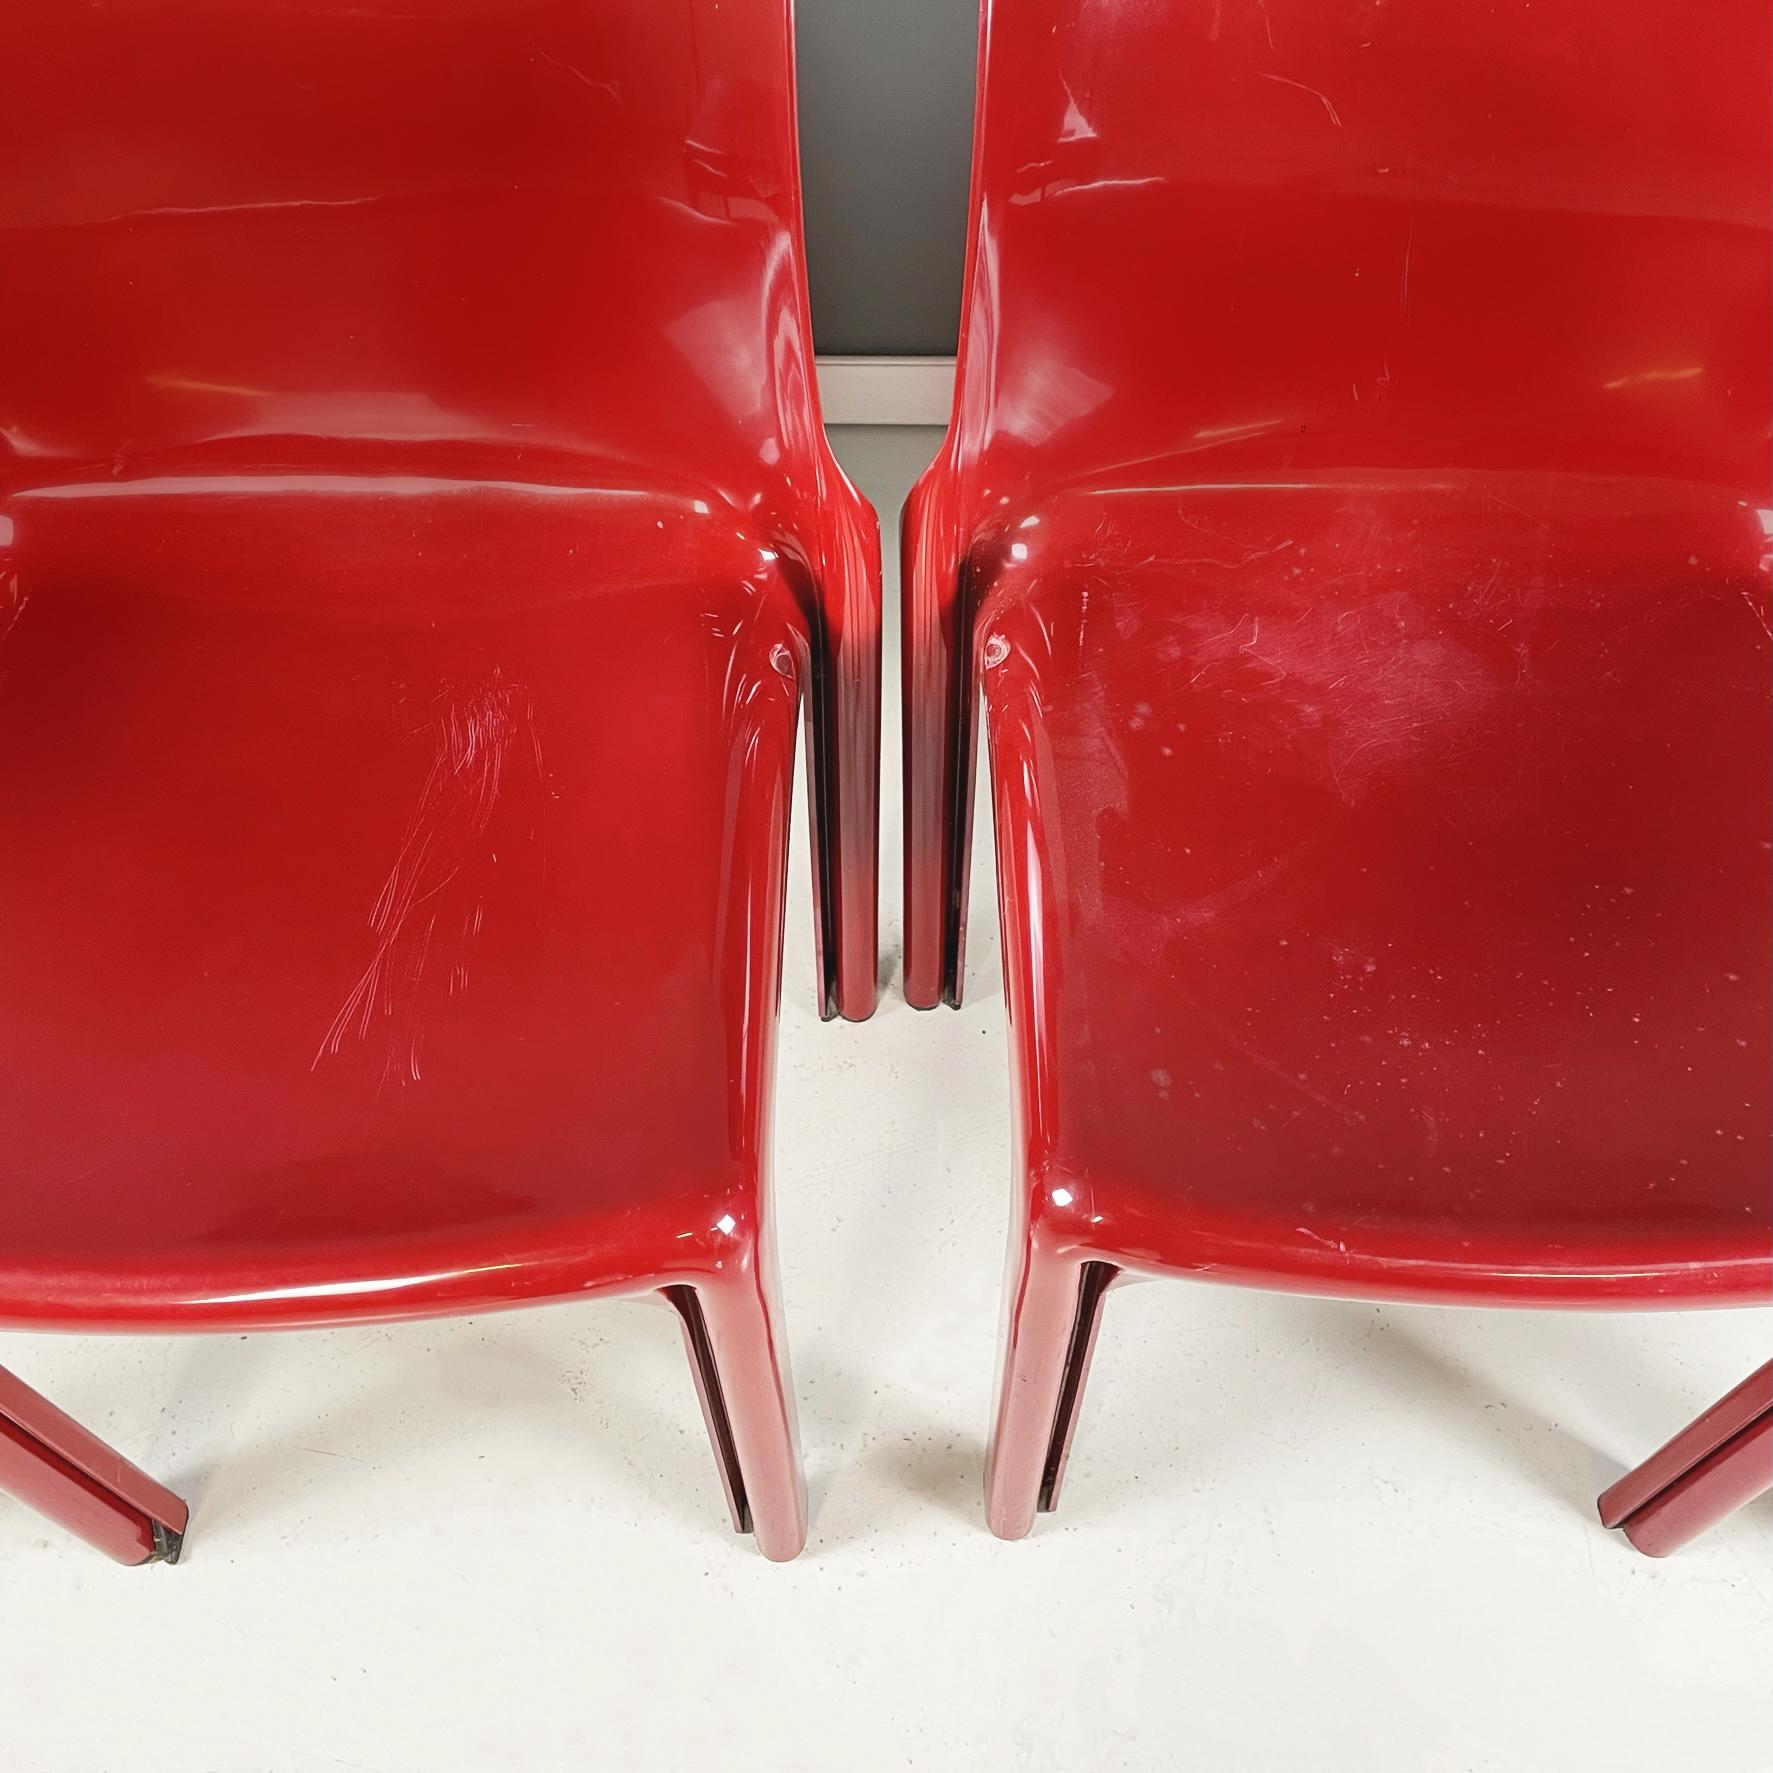 Plastic Italian modern plastic red Chairs Selene by Vico Magistretti for Artemide, 1960s For Sale